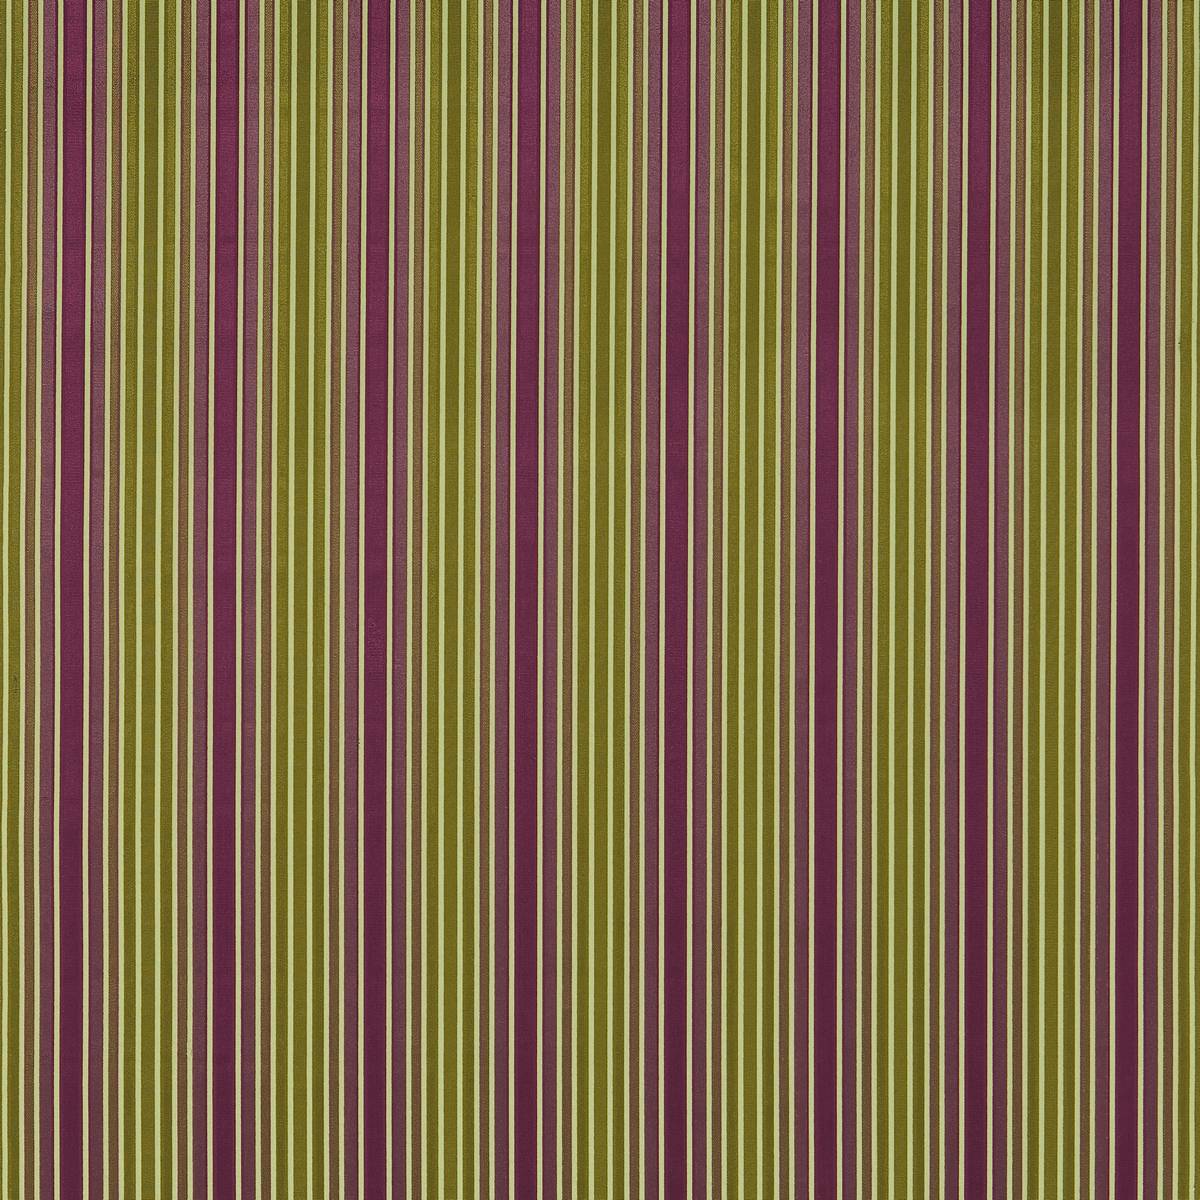 Brook Street Aubergine/Olive Fabric by Zoffany